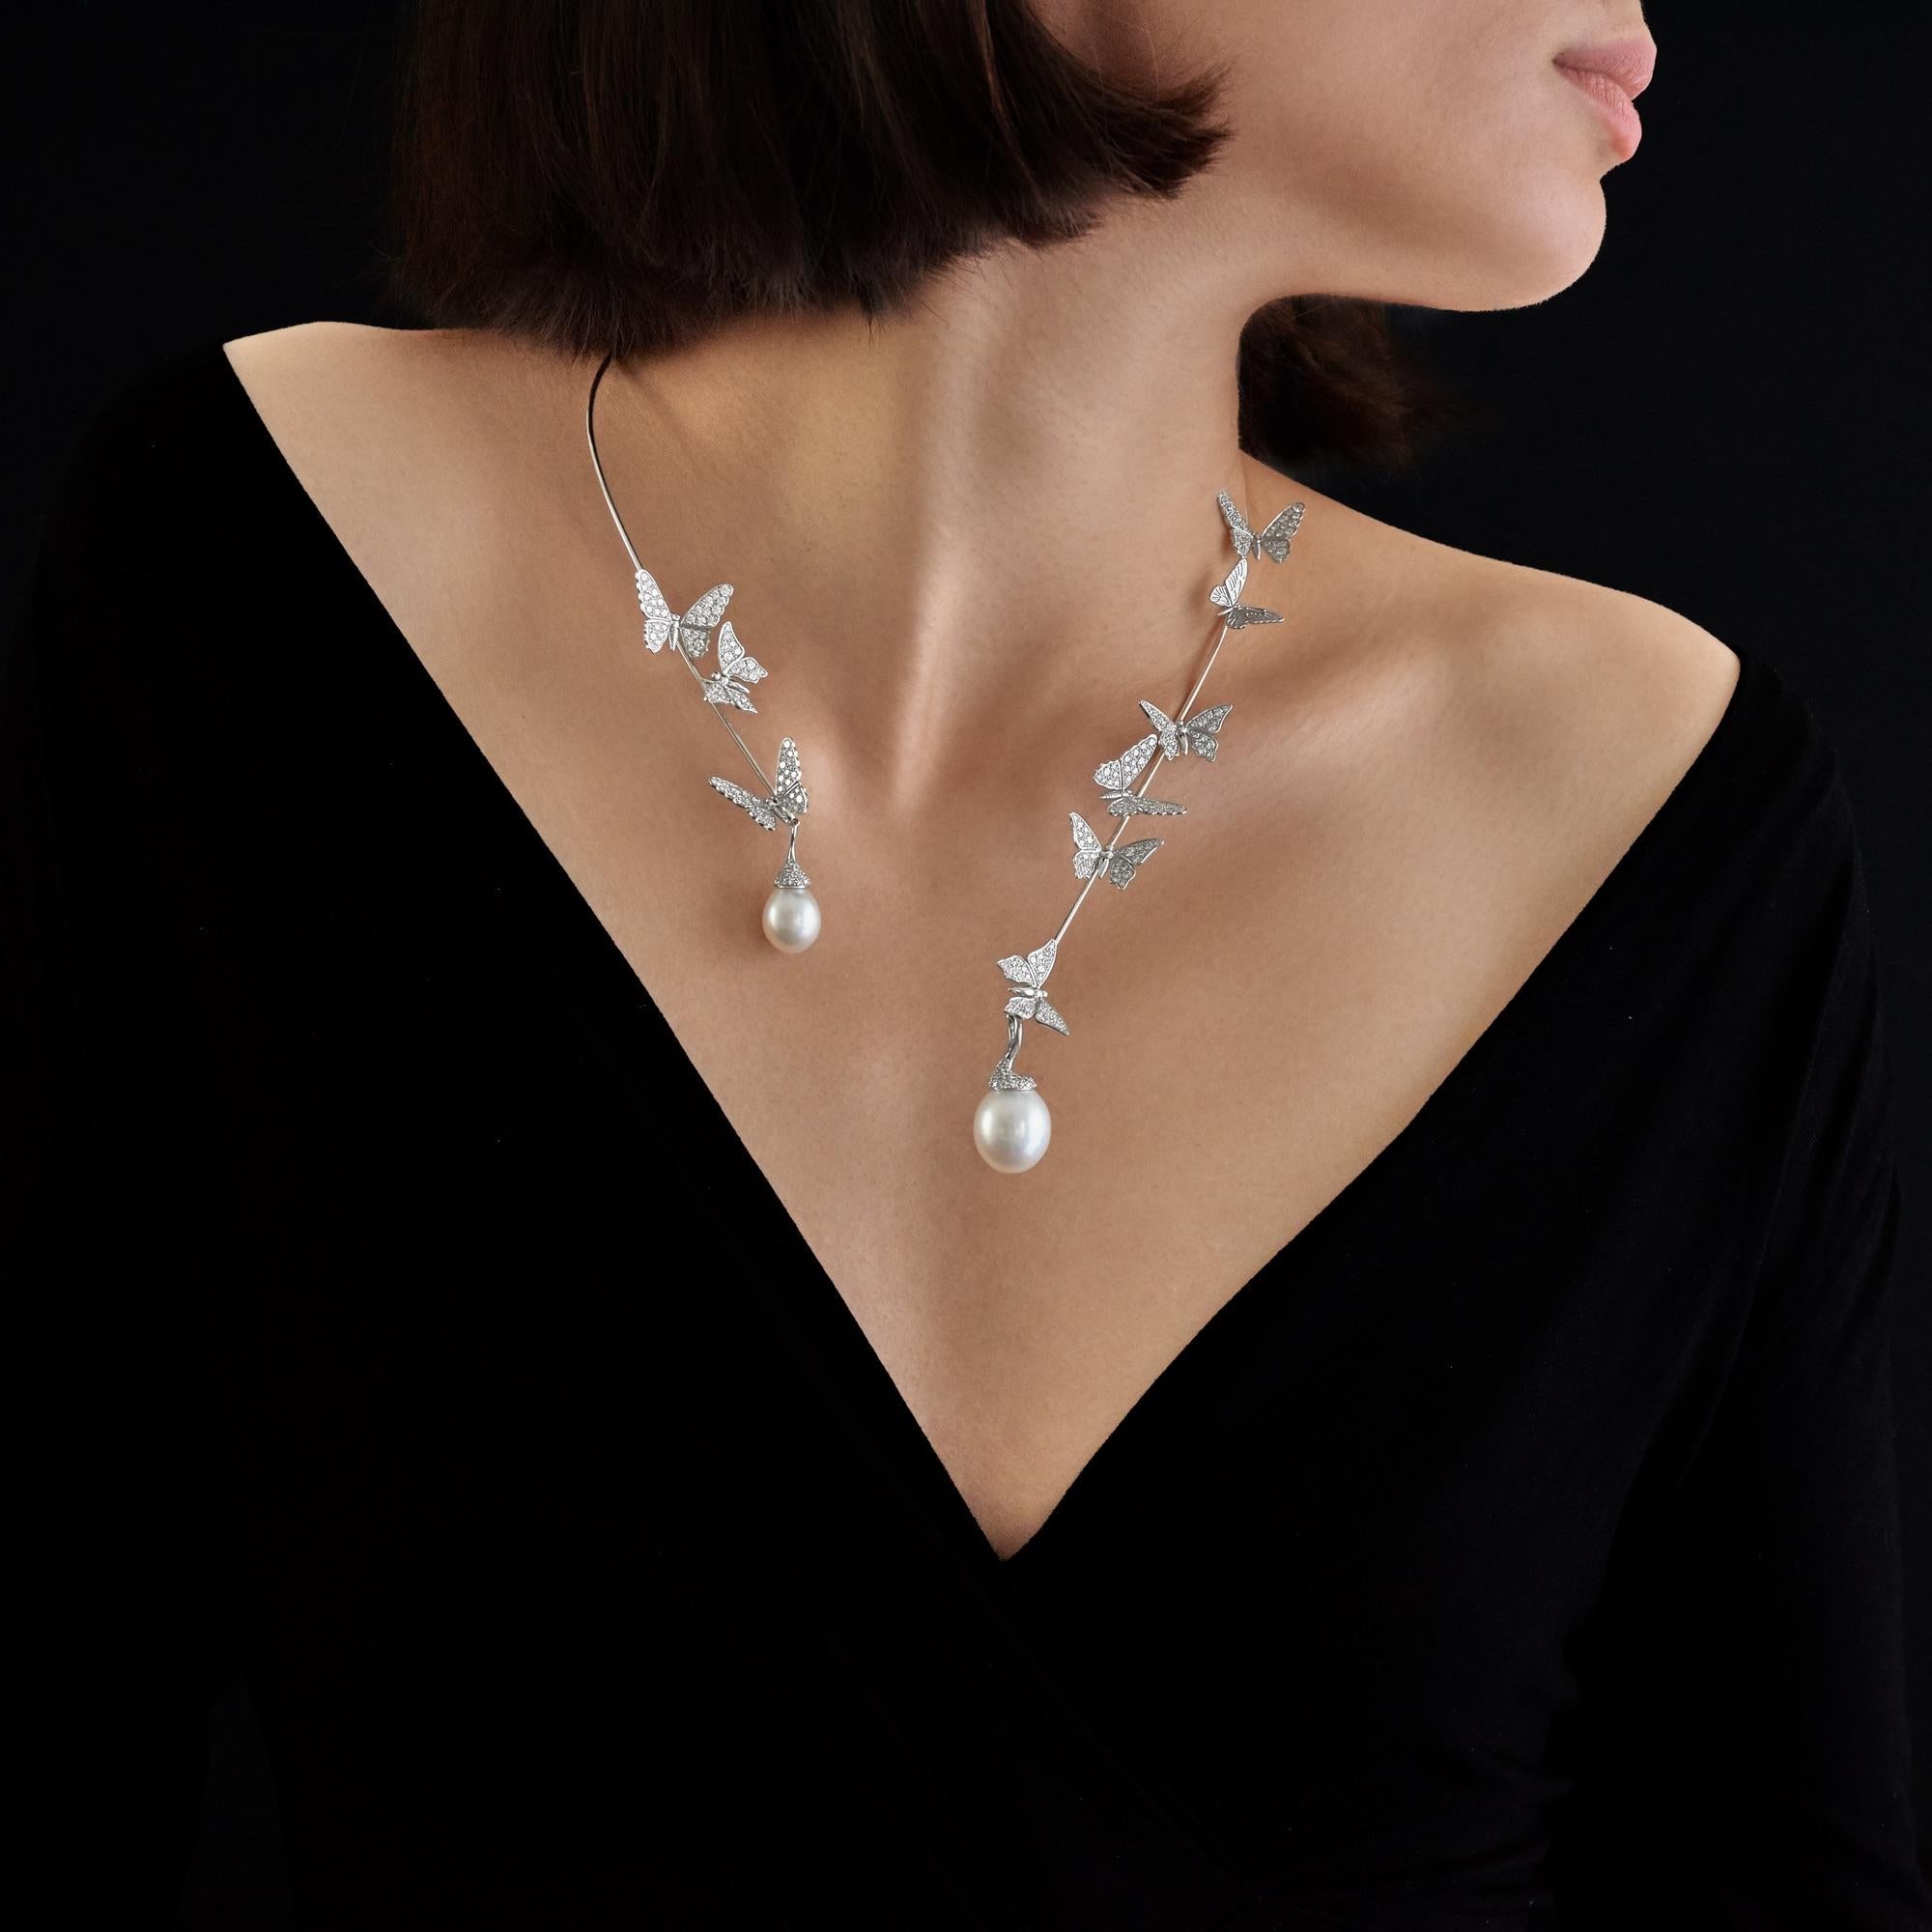 Handcrafted in Paris in the Maison Édéenne High Jewelry workshop, this set is composed of a Butterfly necklace and a ring. The necklace features eight butterflies in 18K white gold set with brilliant-cut diamonds and one butterfly in 18K white gold,